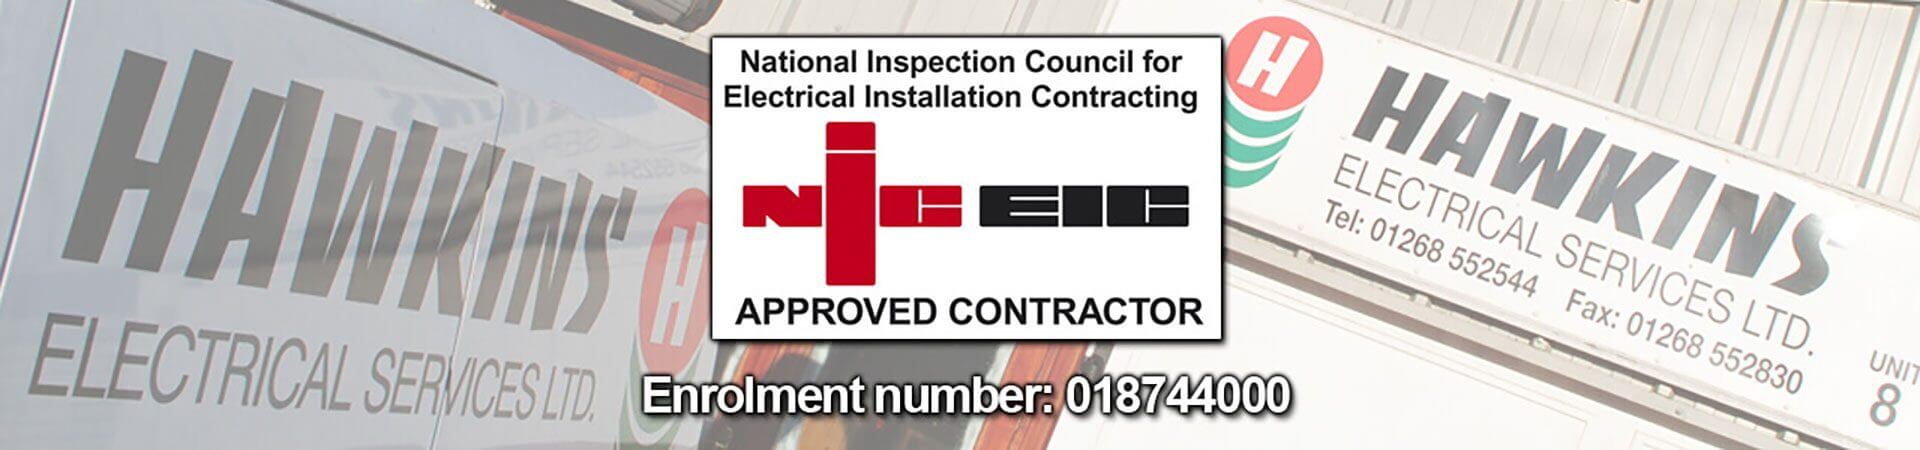 Hawkins Electical Services Are NIC EIC Approved